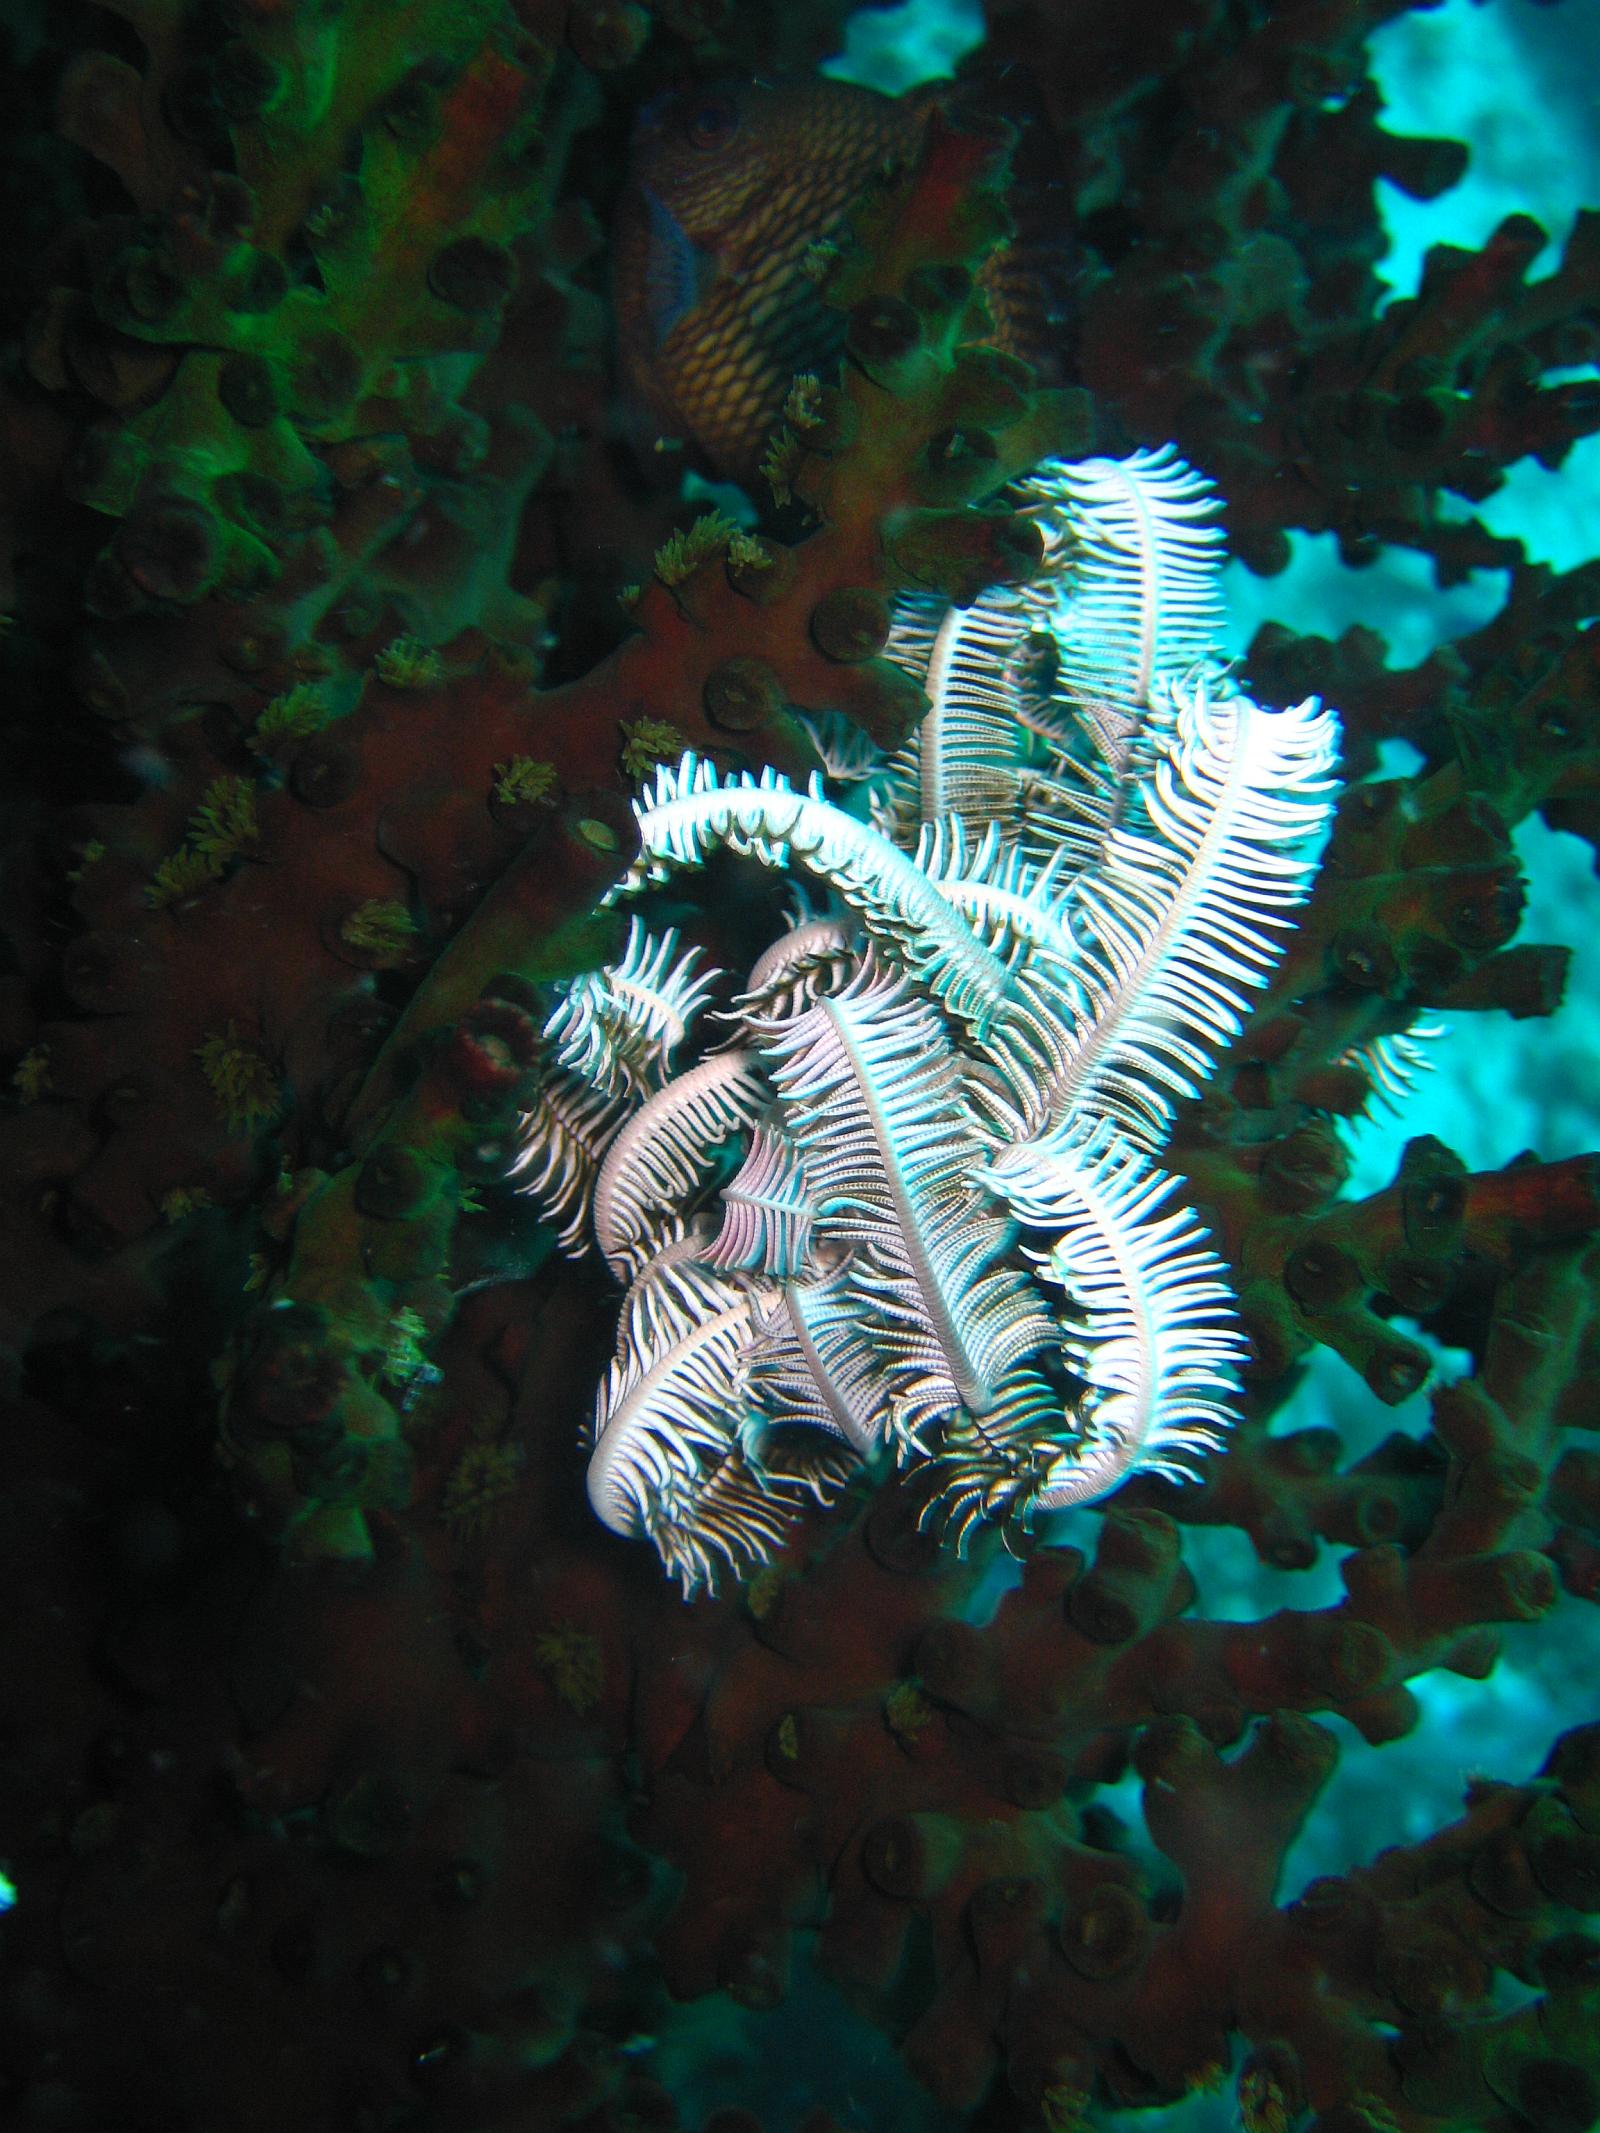 more feather star